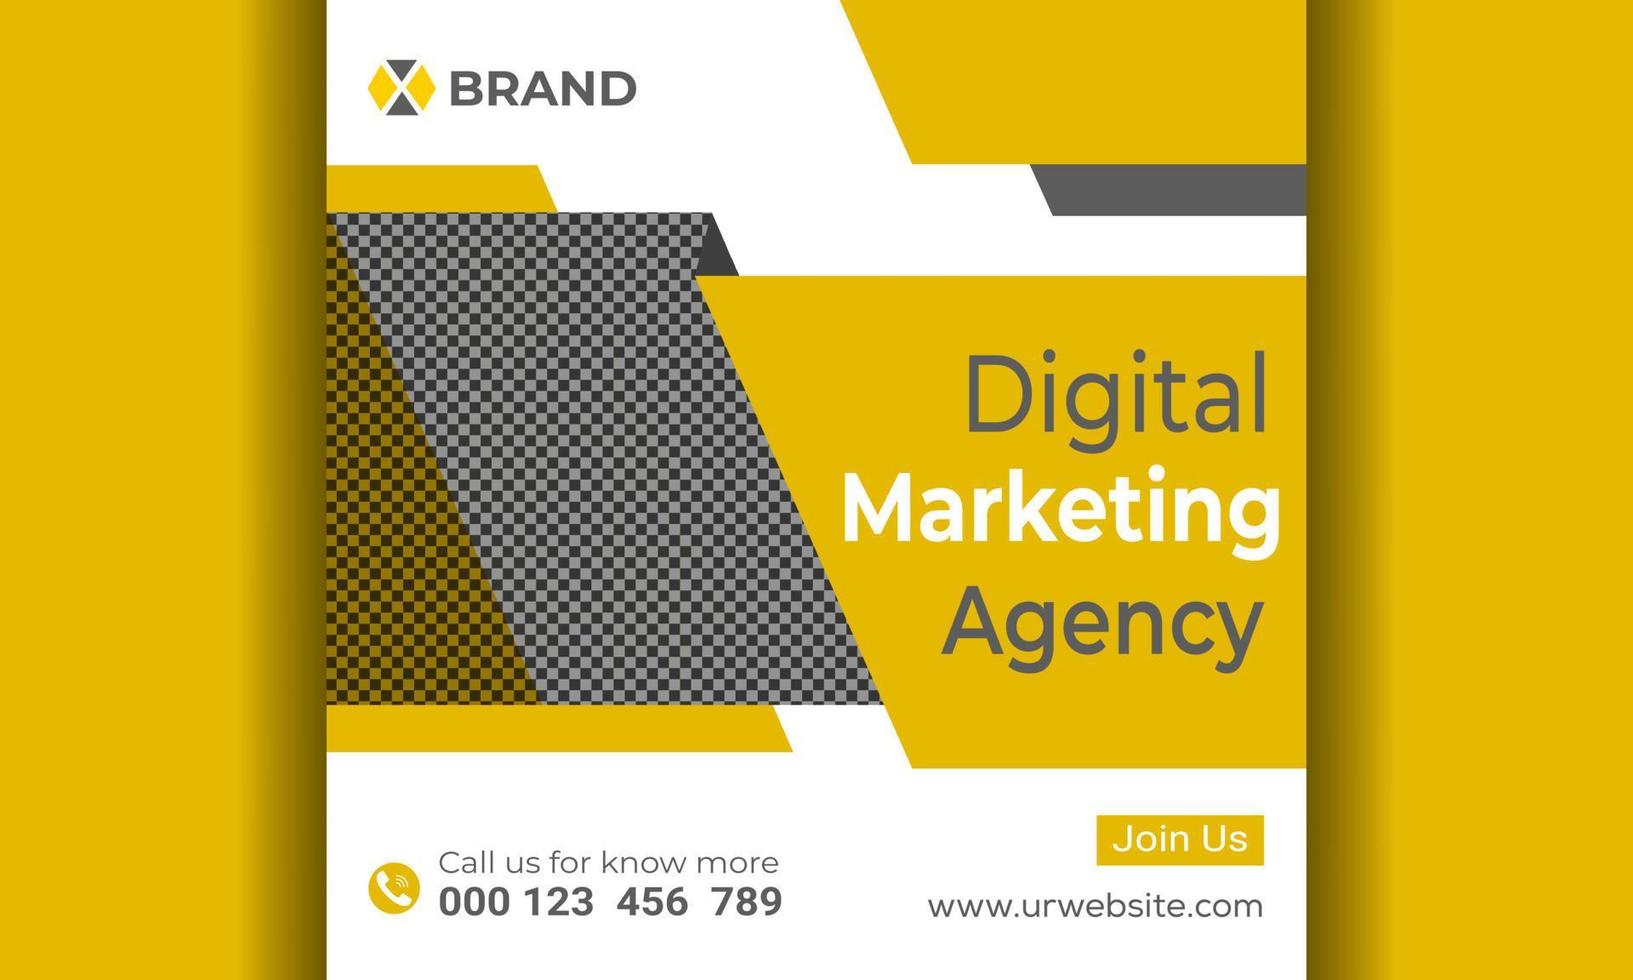 Marketing agency and corporate ad Banner vector